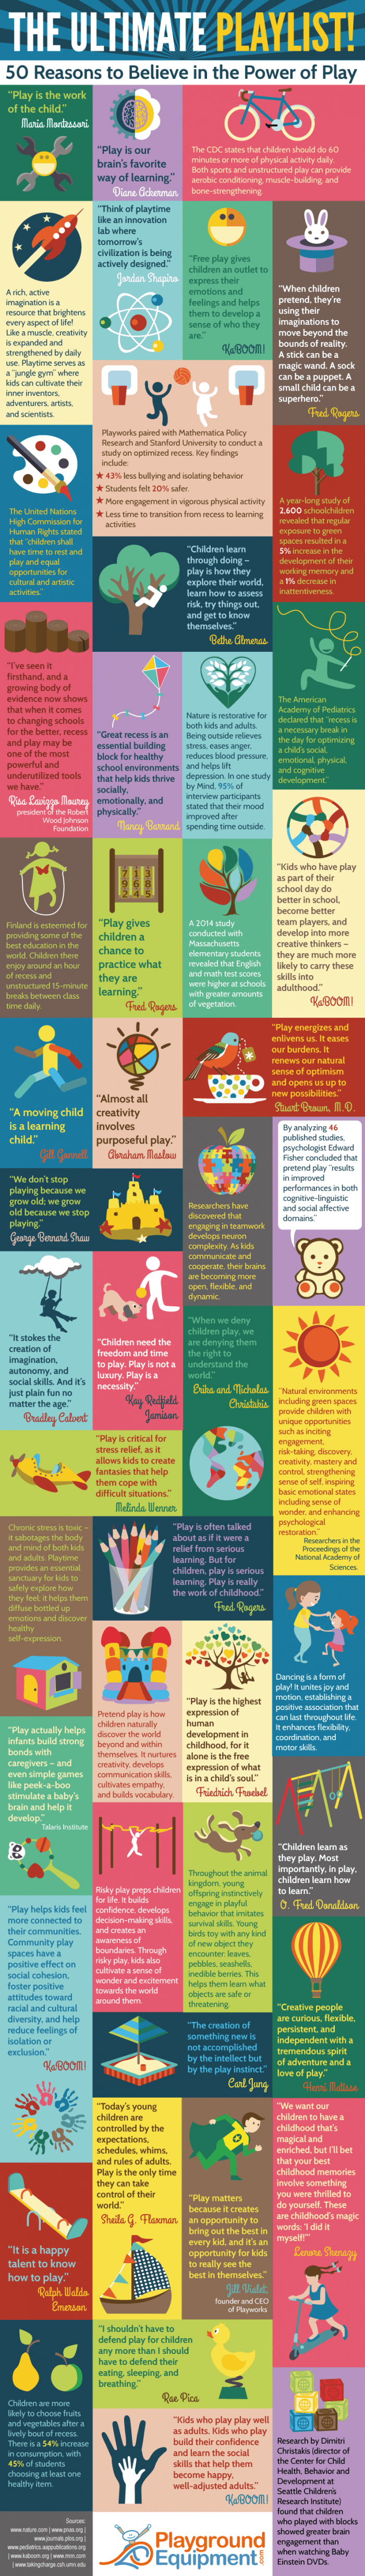 infographic of different quotes about the benefits of play for children